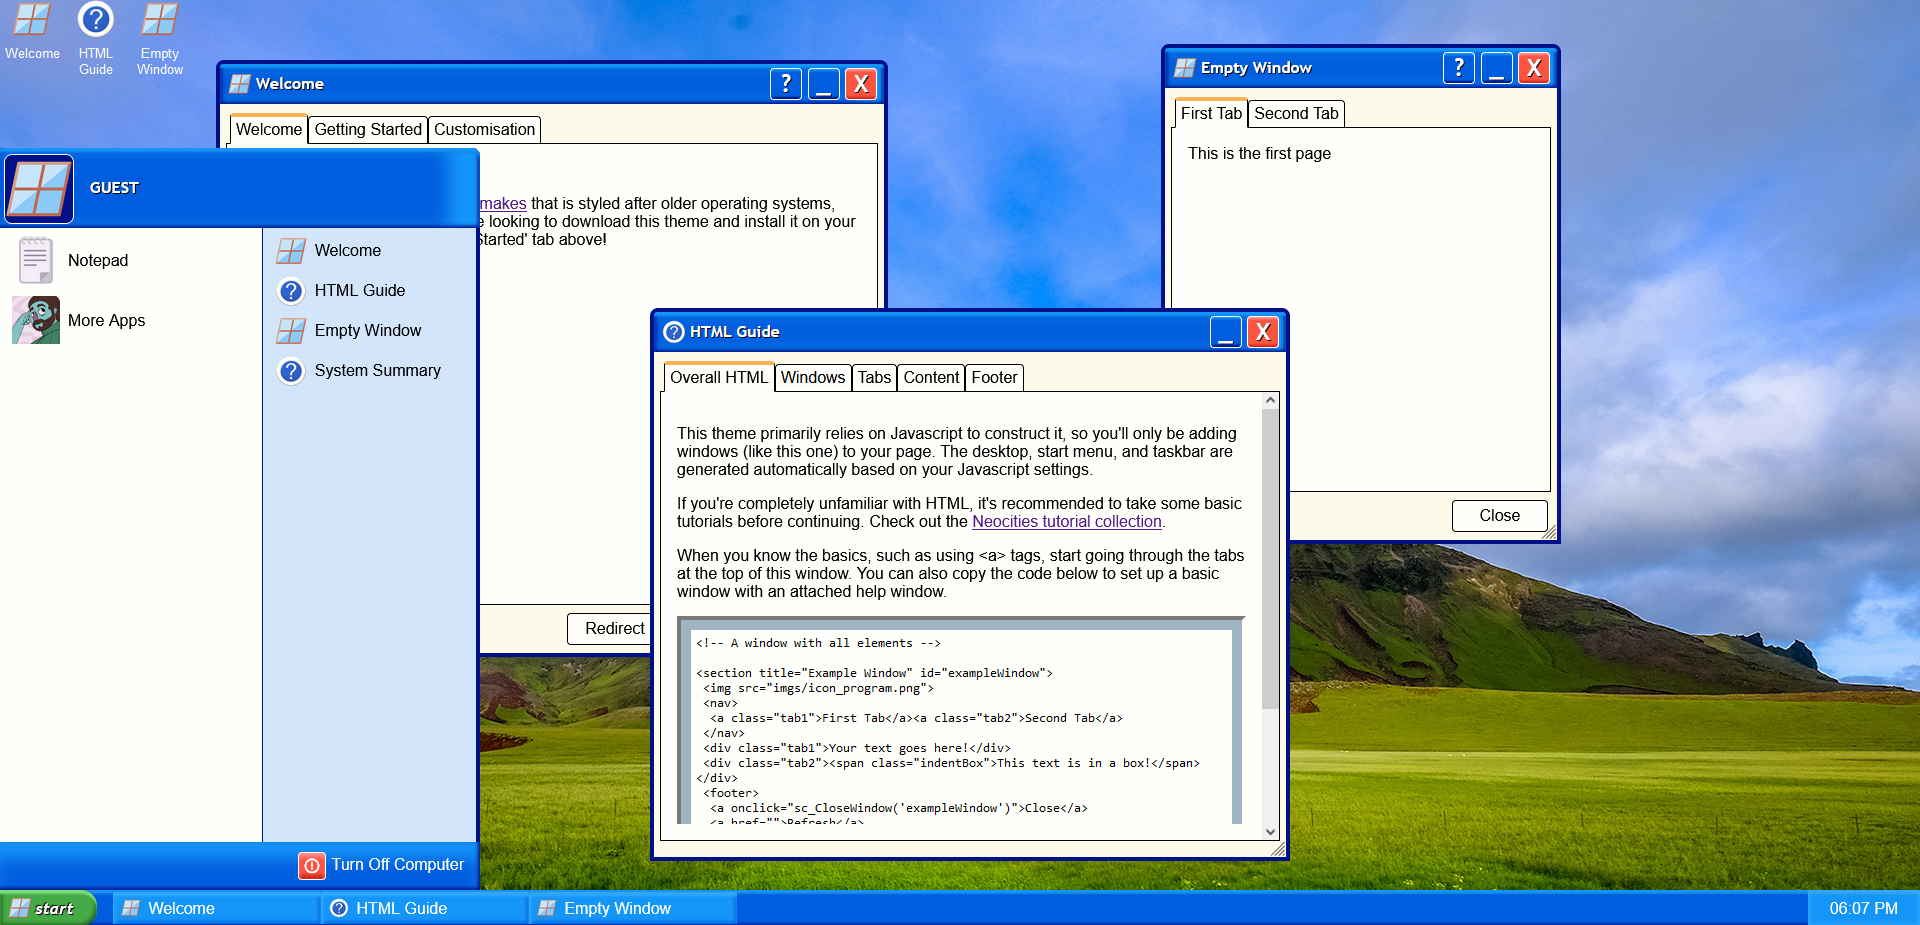 An image showing a preview of the Glasspane Mana theme with various windows and the start menu open.